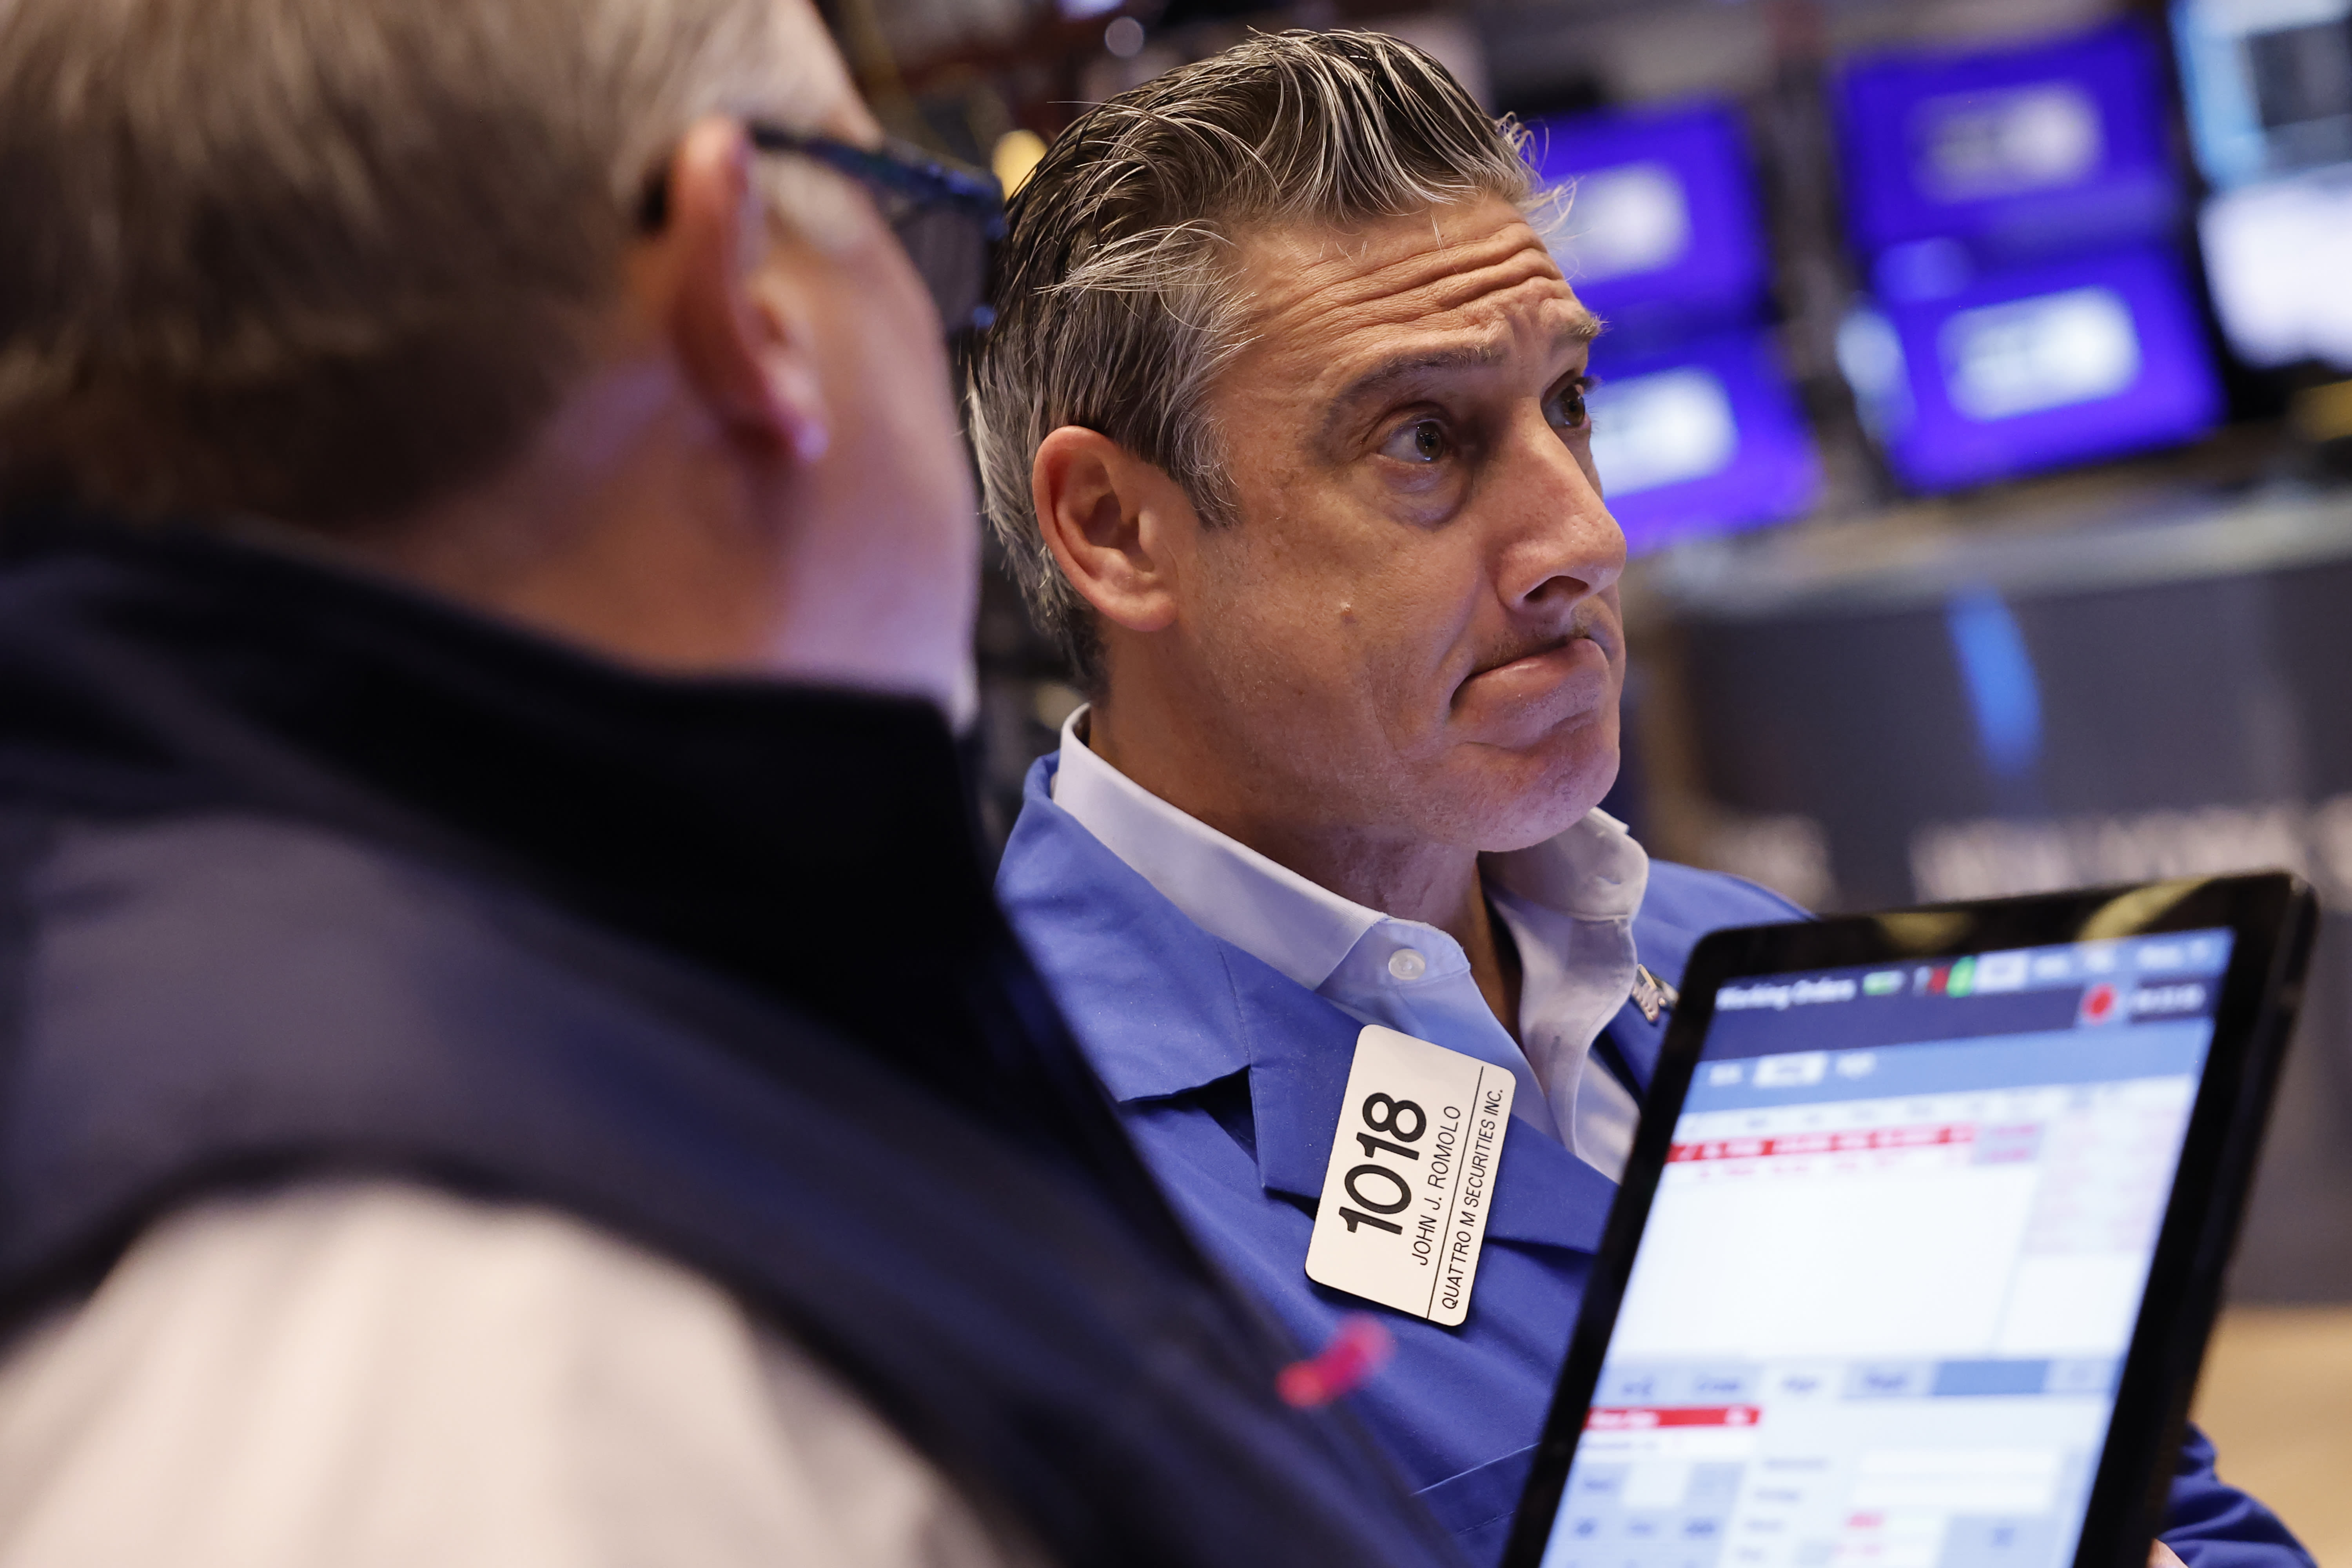 Stock market today: Stocks waver after jobs report smashes expectations